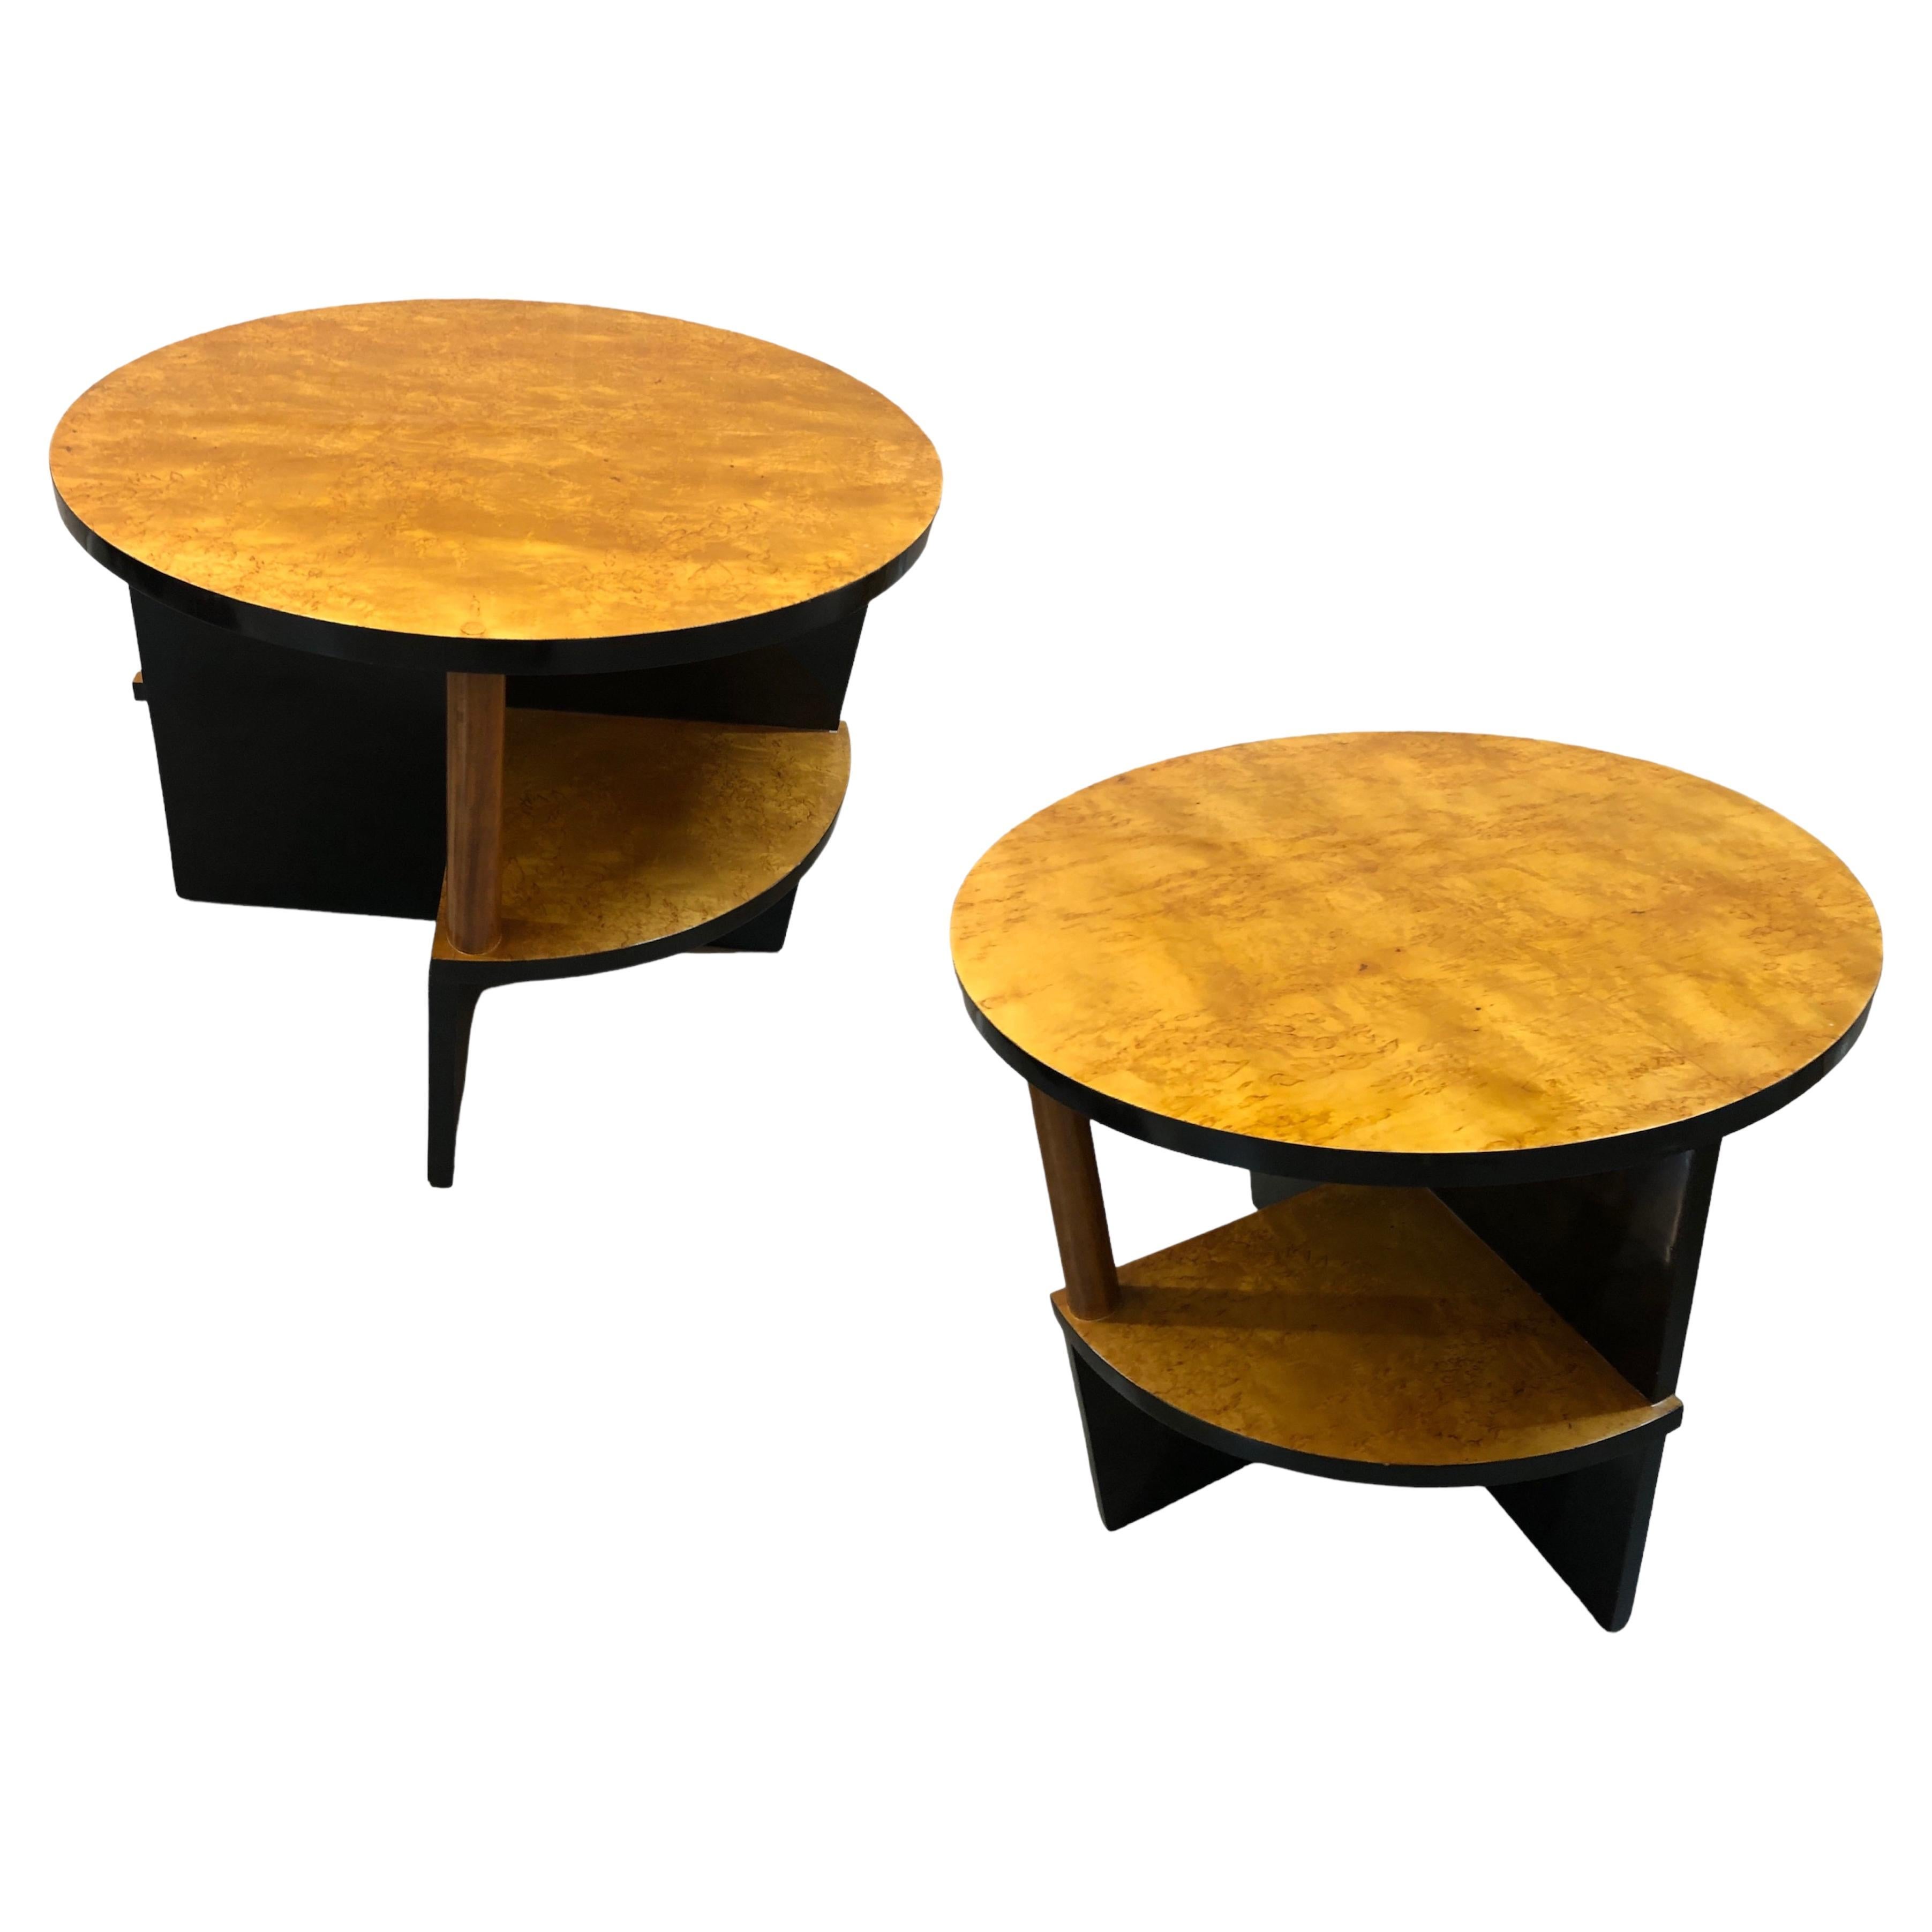 Amaizing Art Deco, 2 Tables in Wood, France, 1930 For Sale